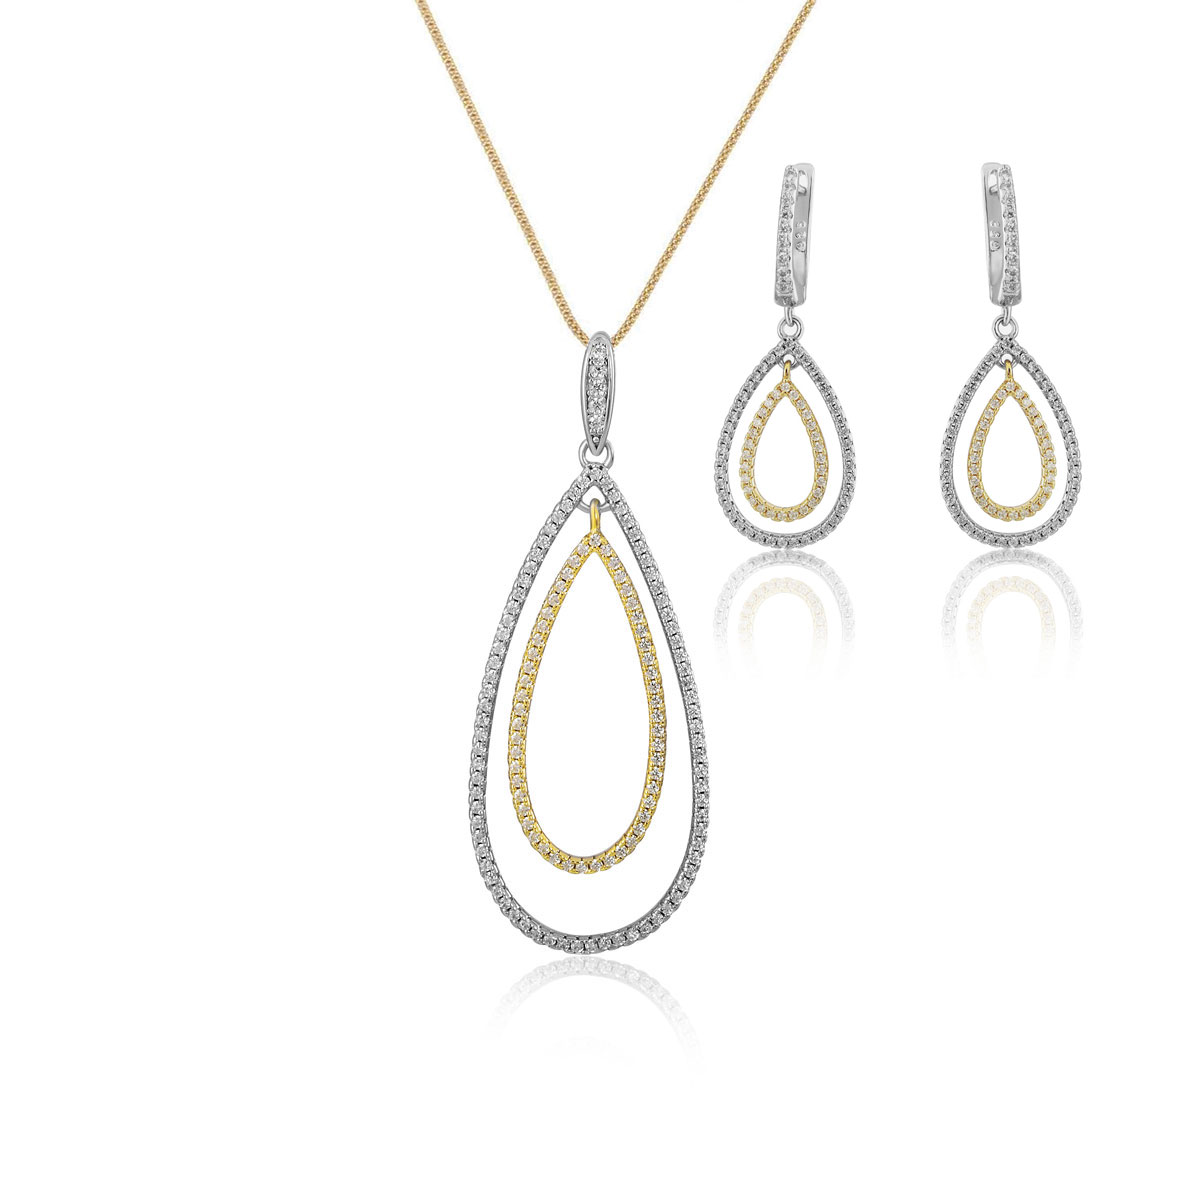 Cashs Ireland, Teardrop Sterling Silver and Gold Pave Necklace and Pierced Earring Gift Set